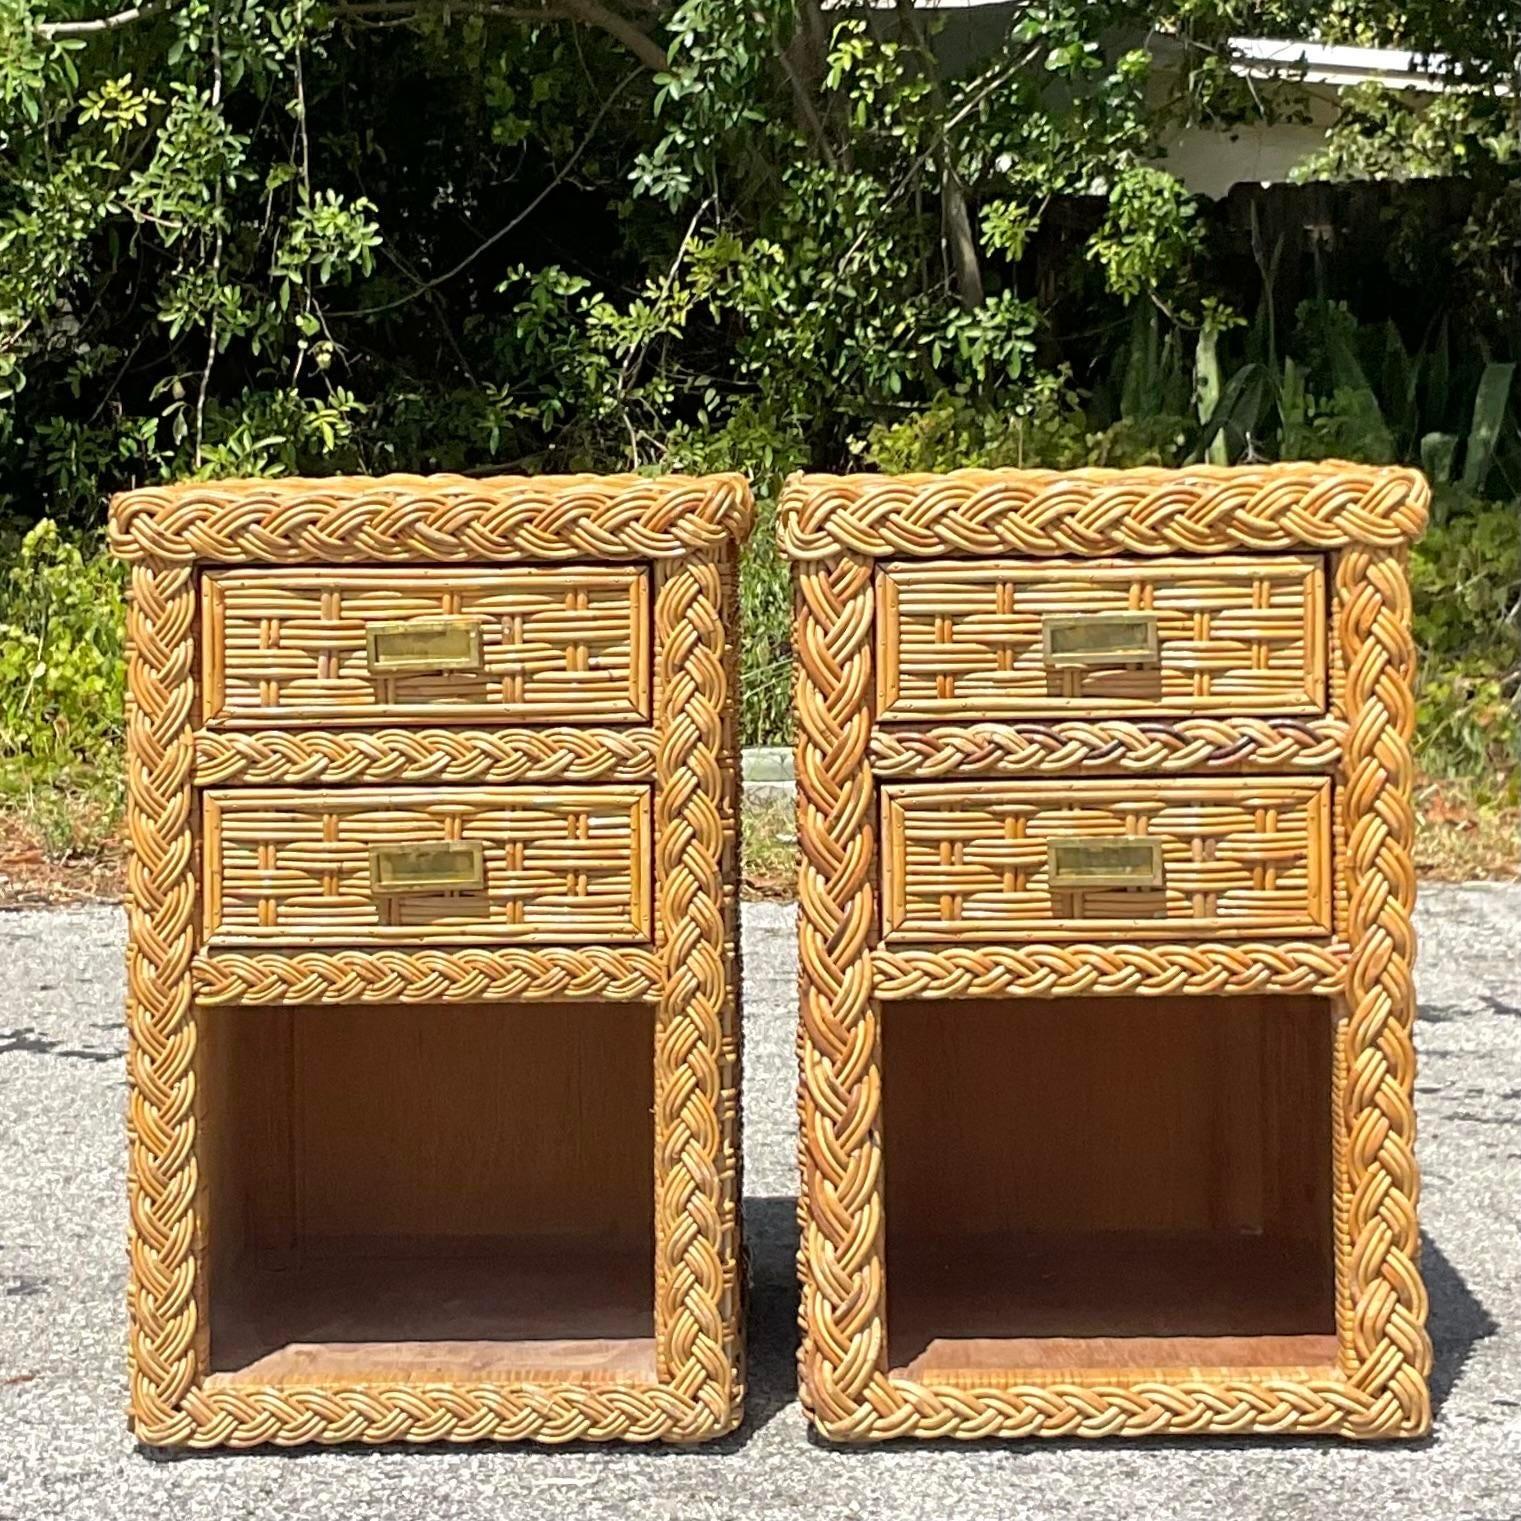 Late 20th Century Vintage Coastal Braided Rattan Nightstands - a Pair For Sale